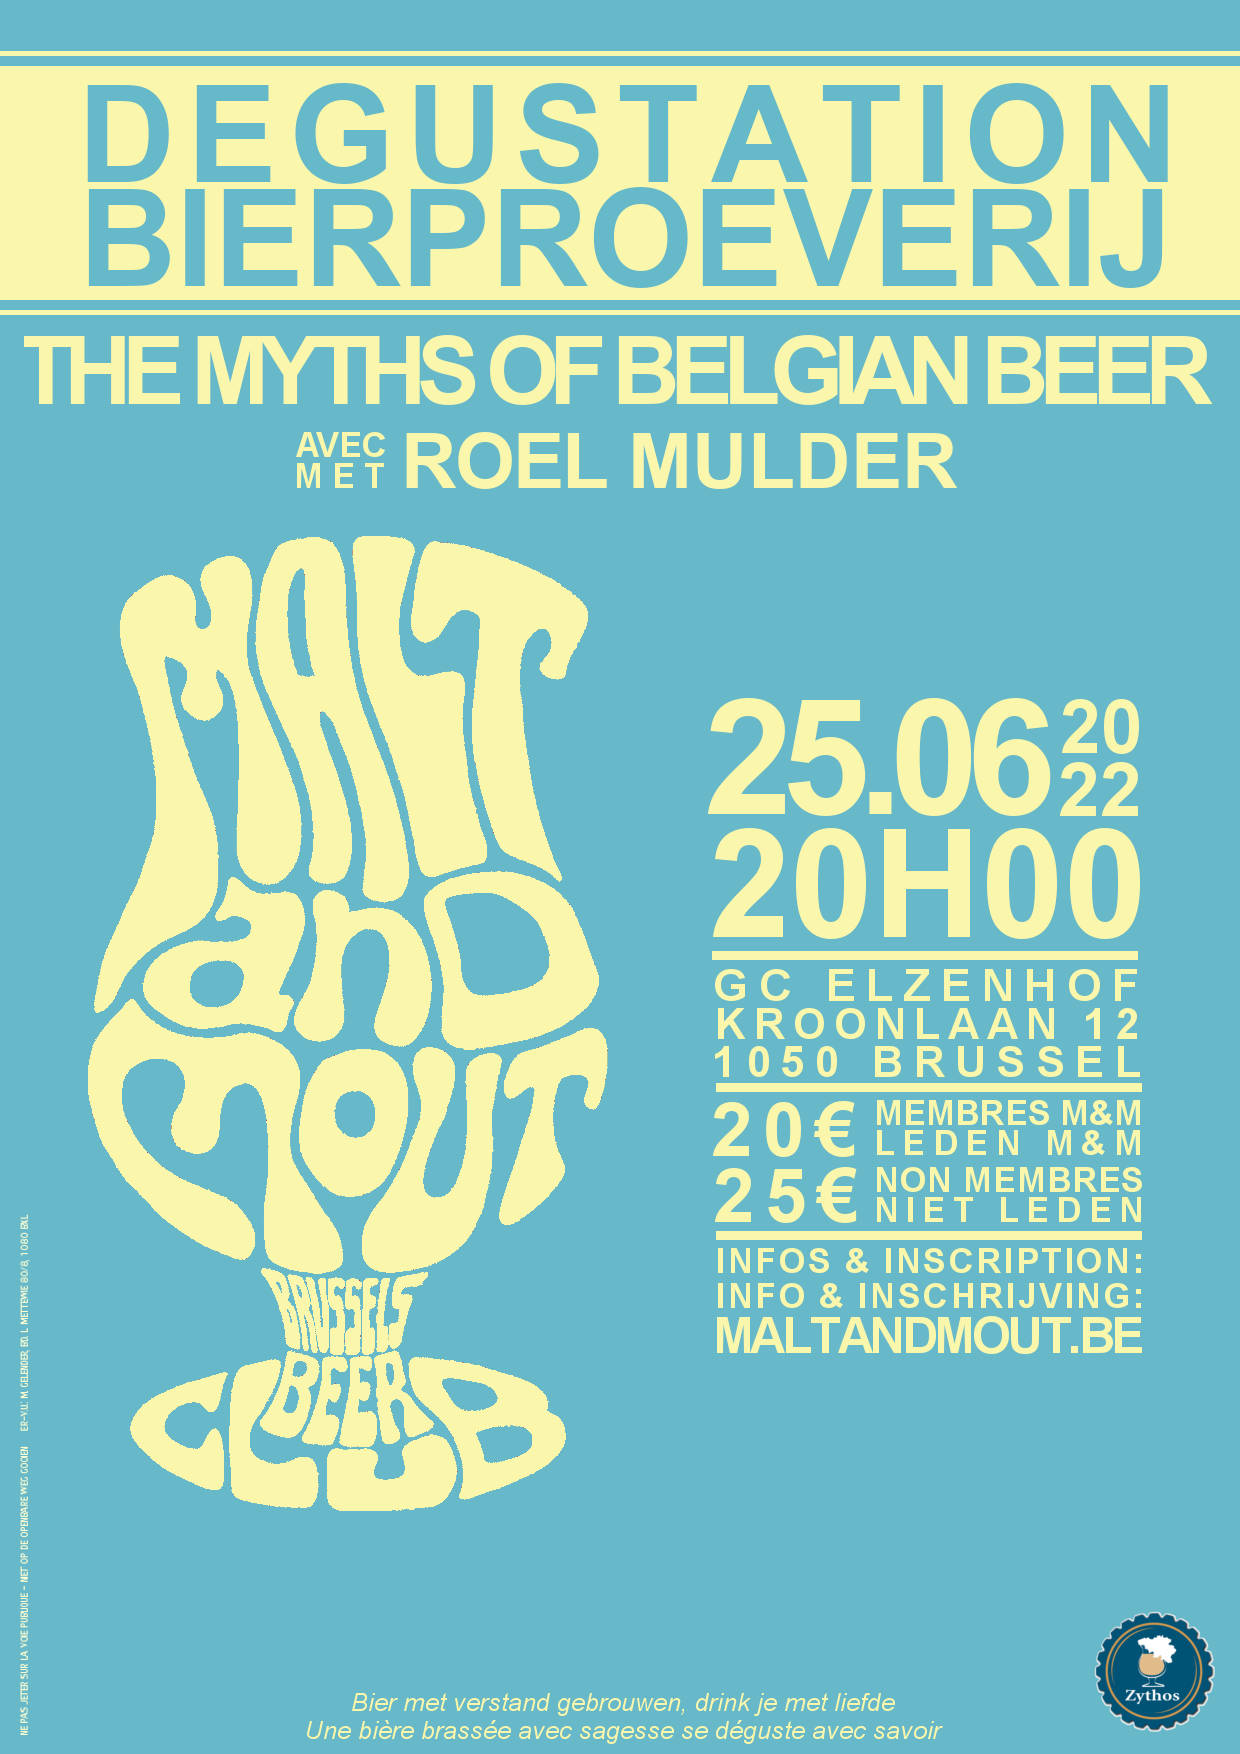 The myths of Belgian Beer